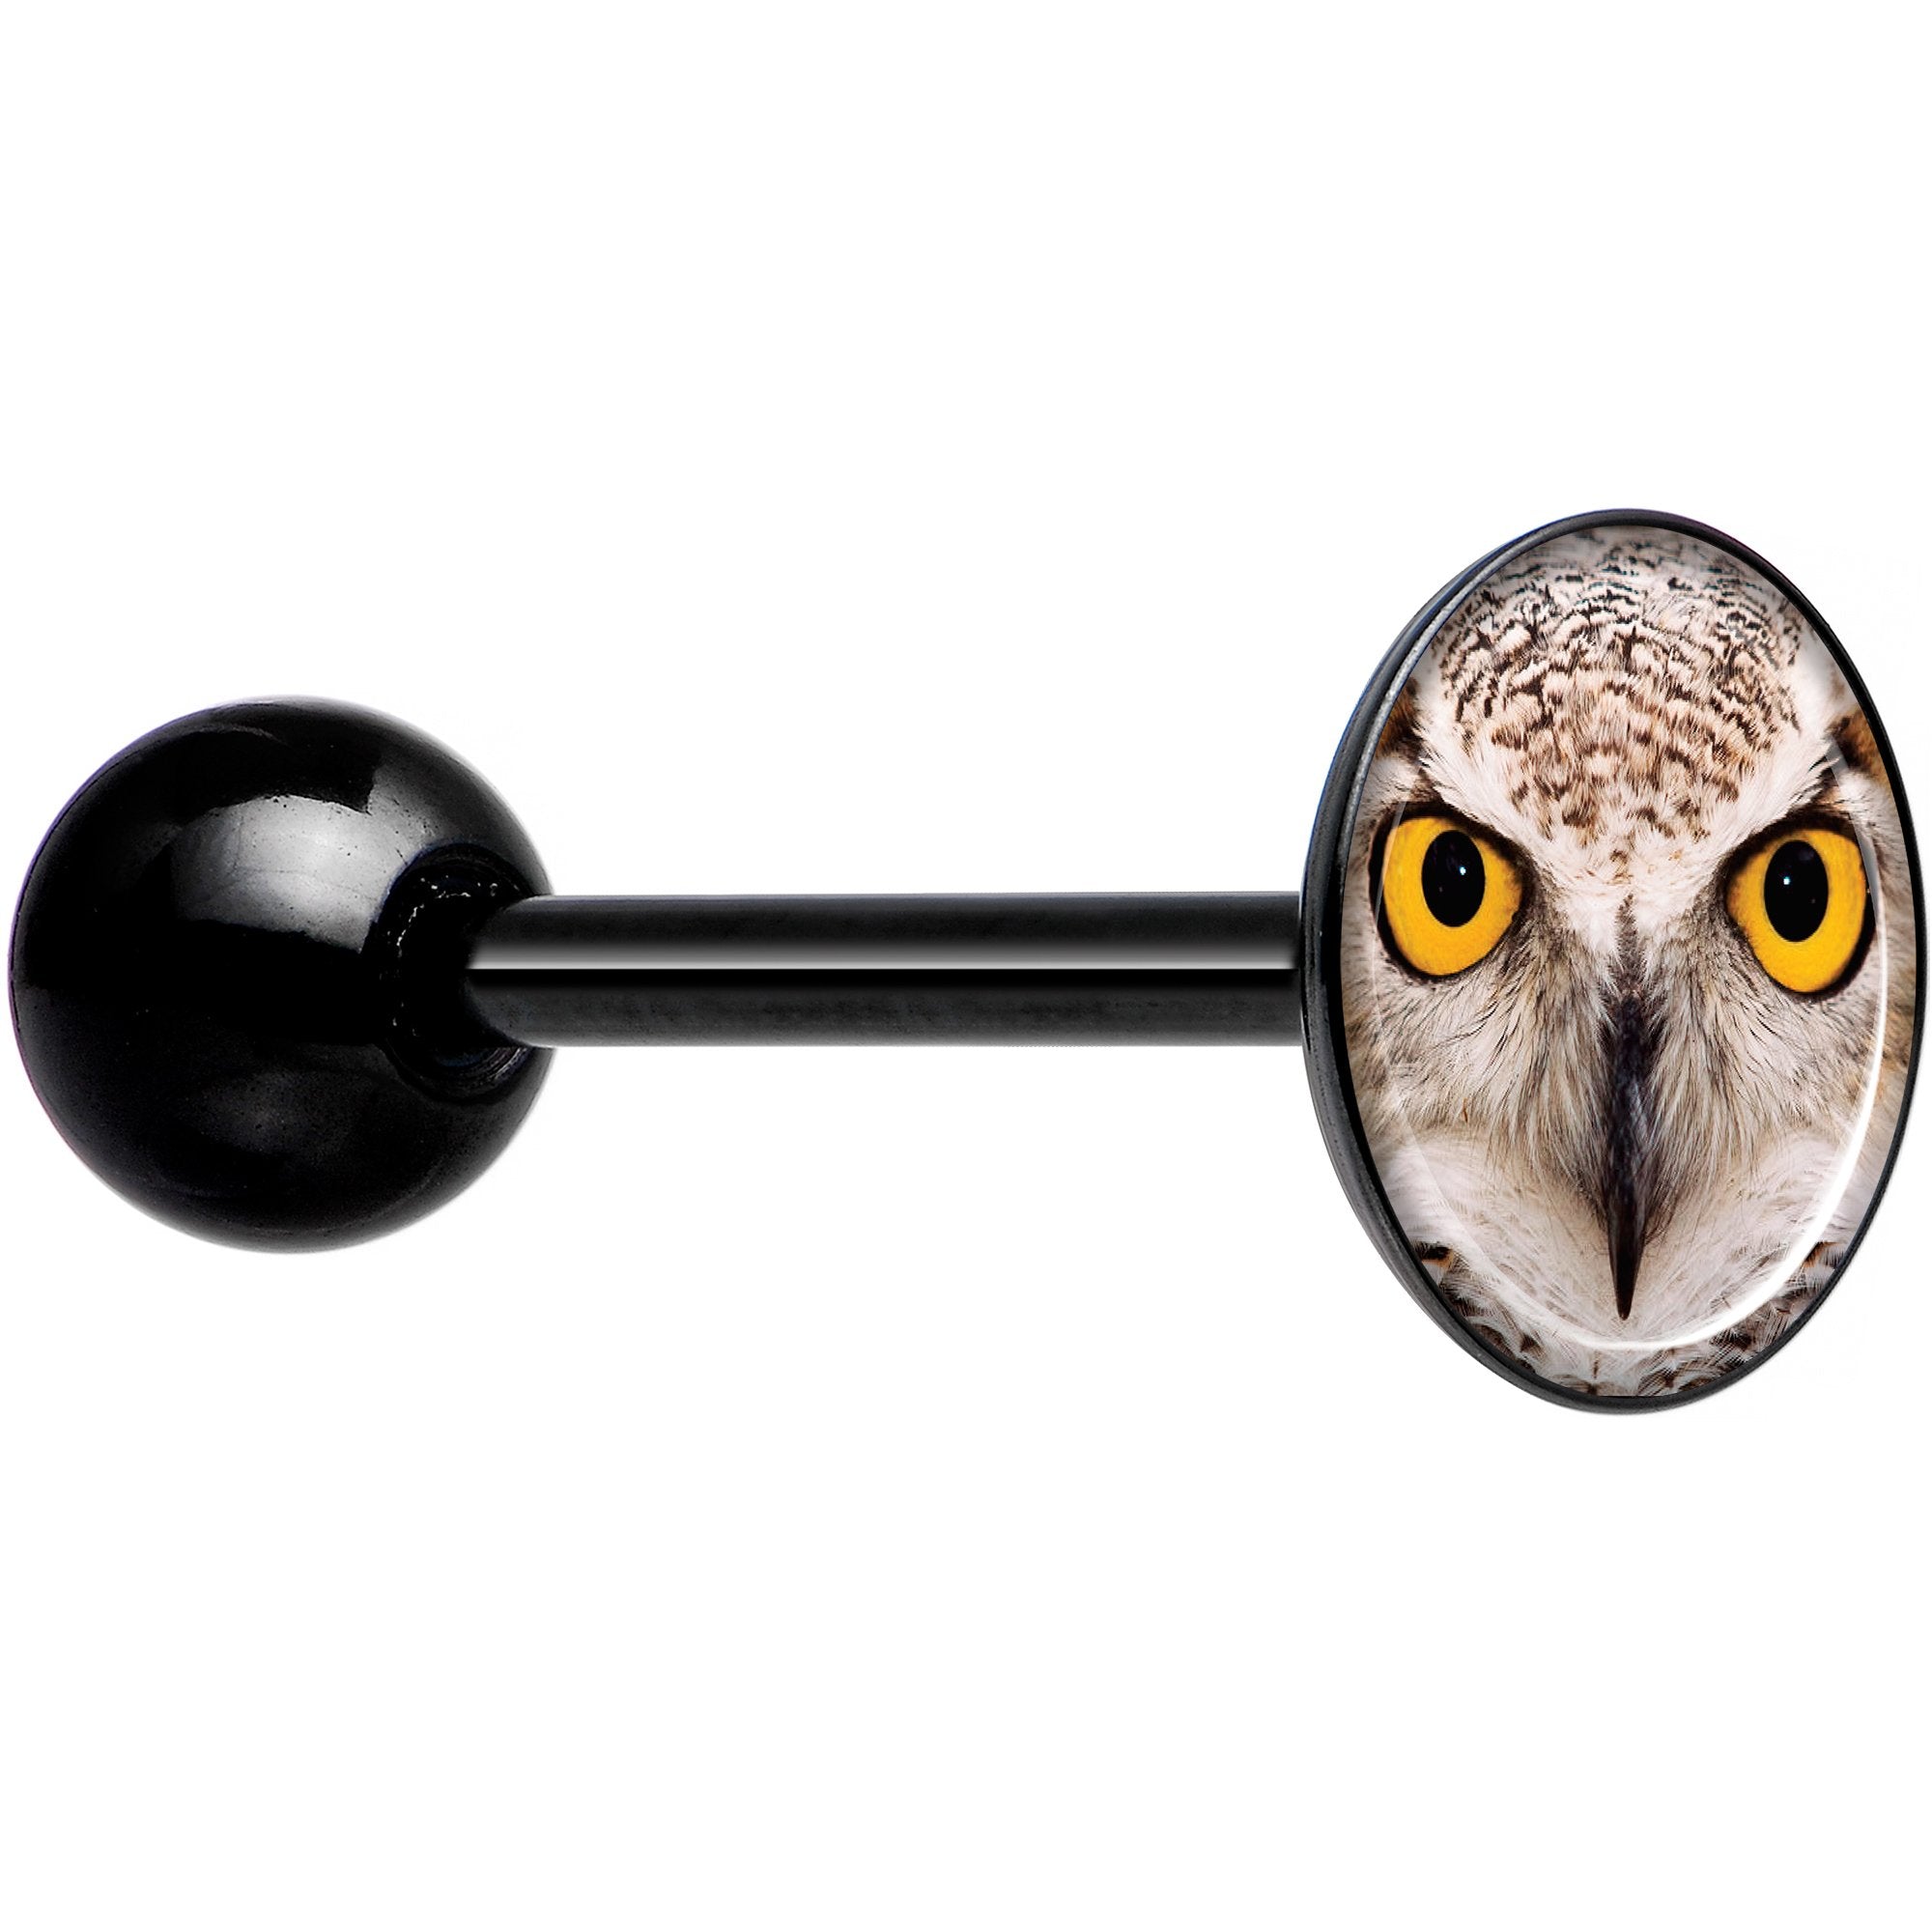 Full Color Owl Black Barbell Tongue Ring